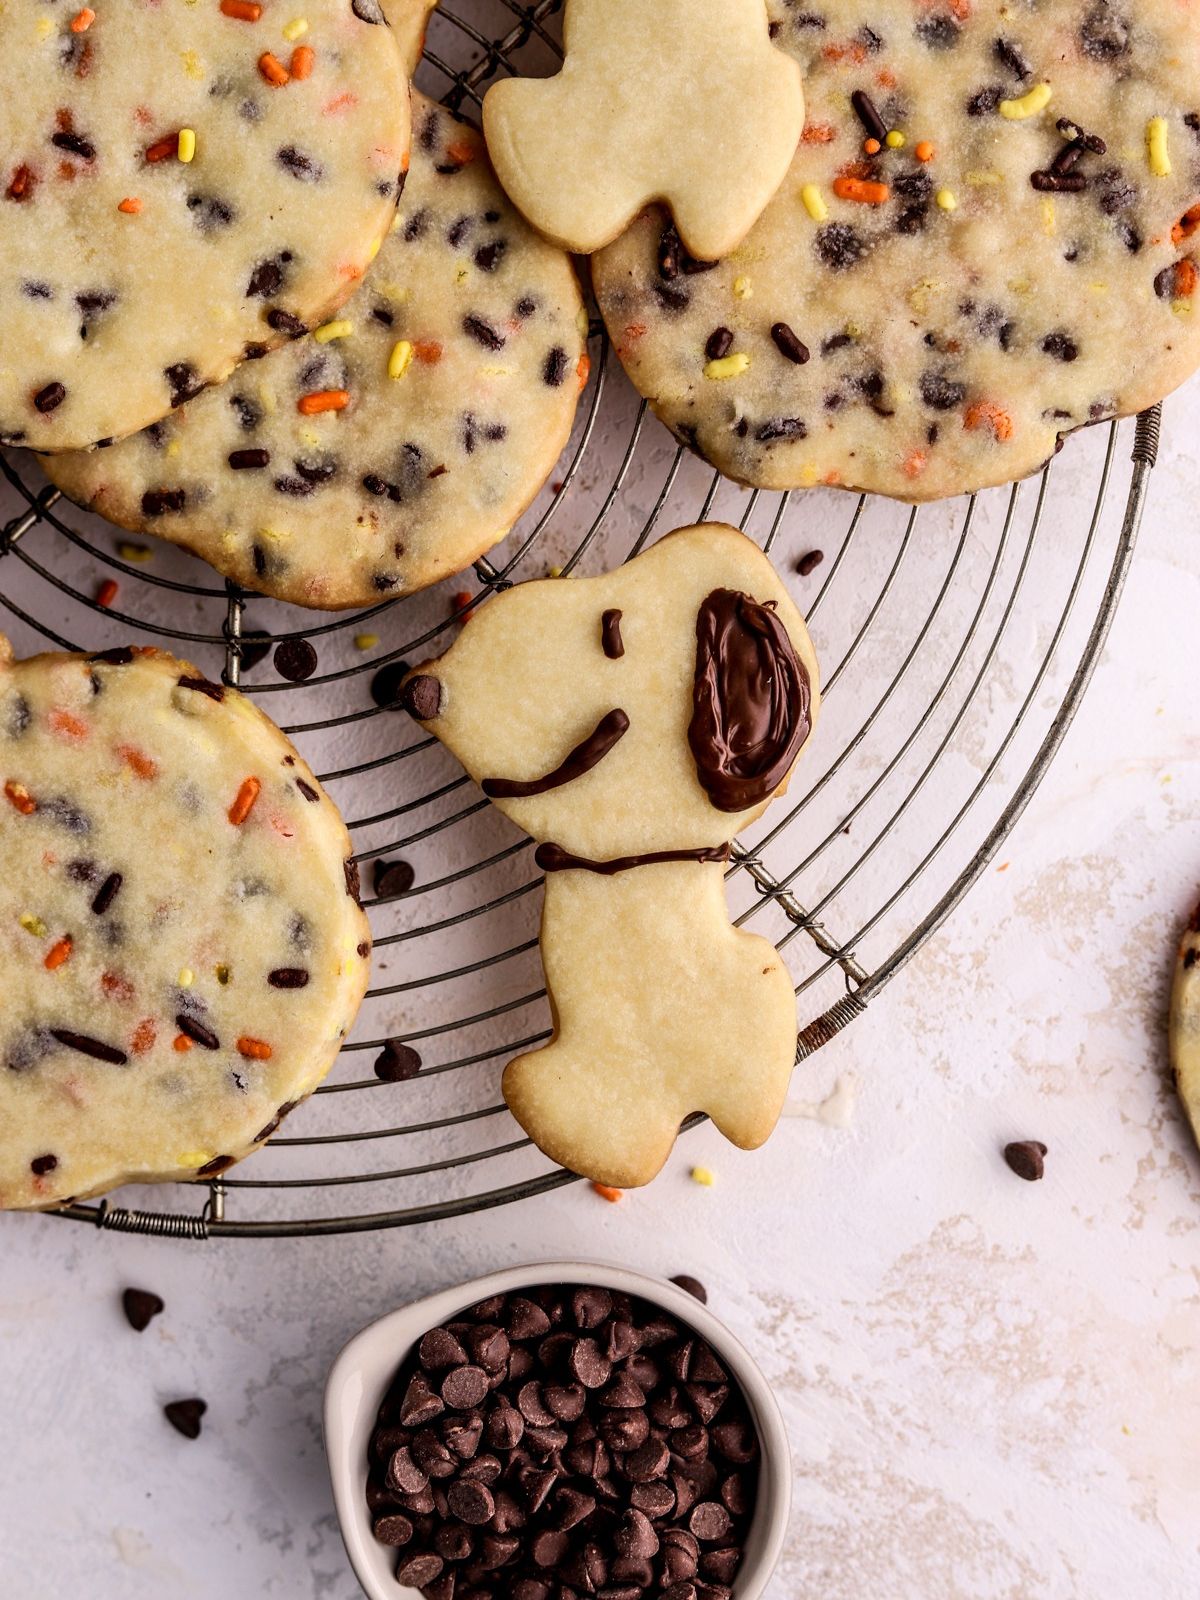 Pumpkin shaped cookies filled with sprinkles and chocolate chips and a snoopy cookie on a rack. 